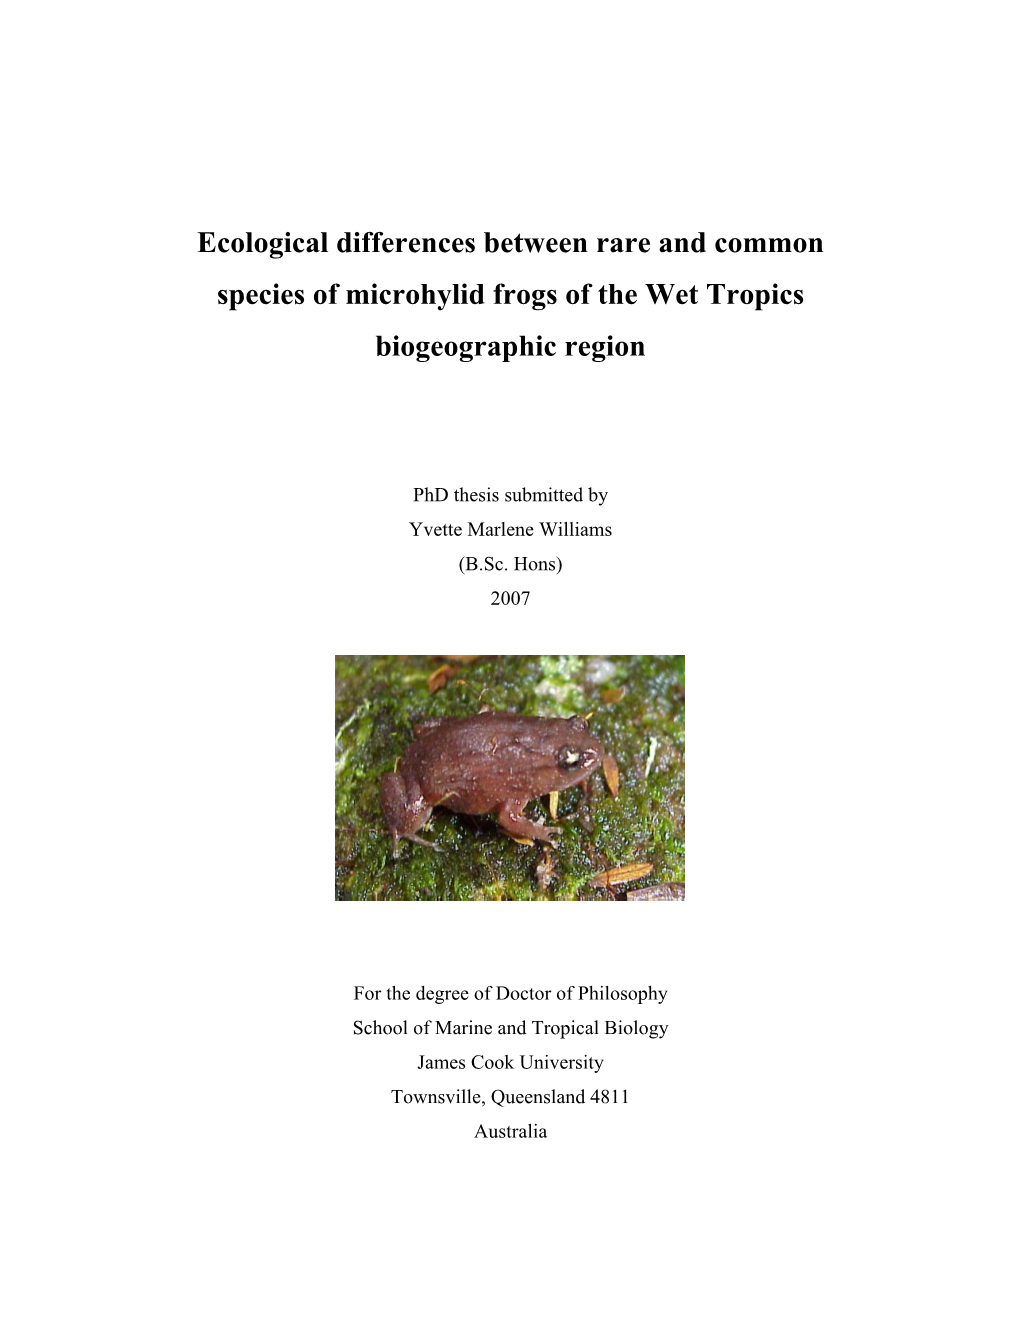 Ecological Differences Between Rare and Common Species of Microhylid Frogs of the Wet Tropics Biogeographic Region